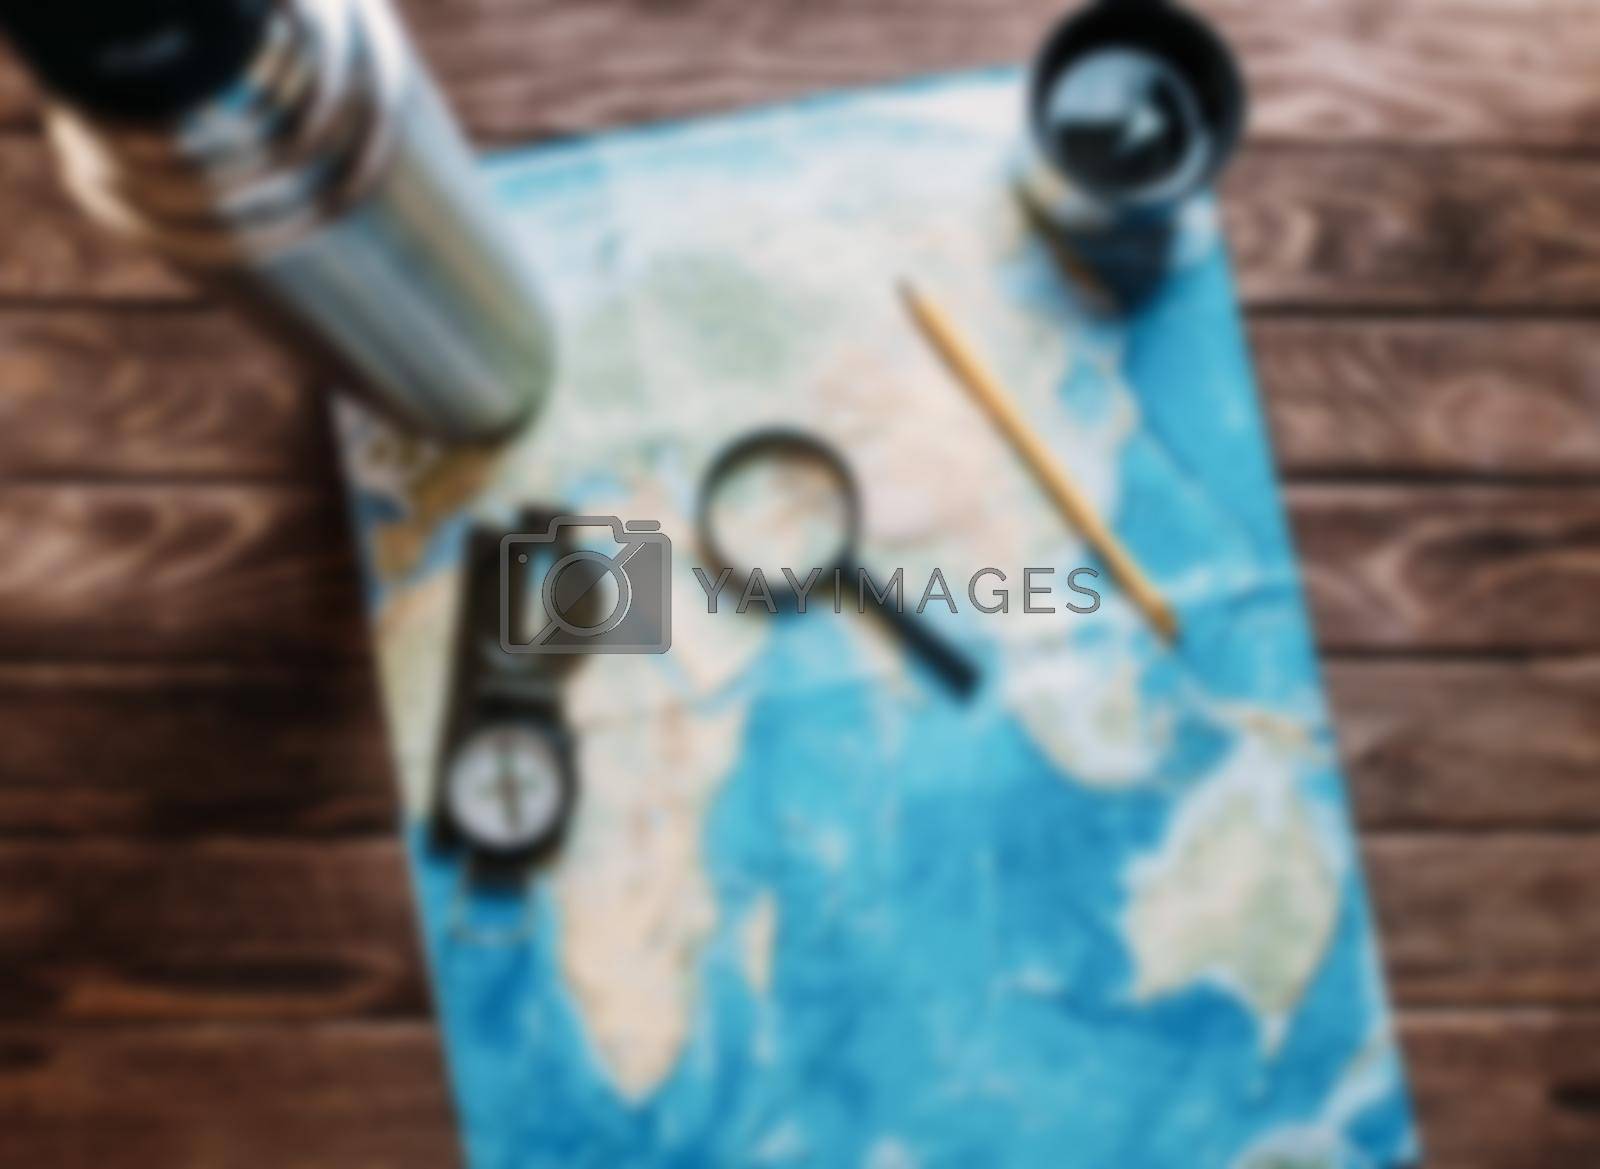 Royalty free image of Map with a magnifying glass. by alexAleksei